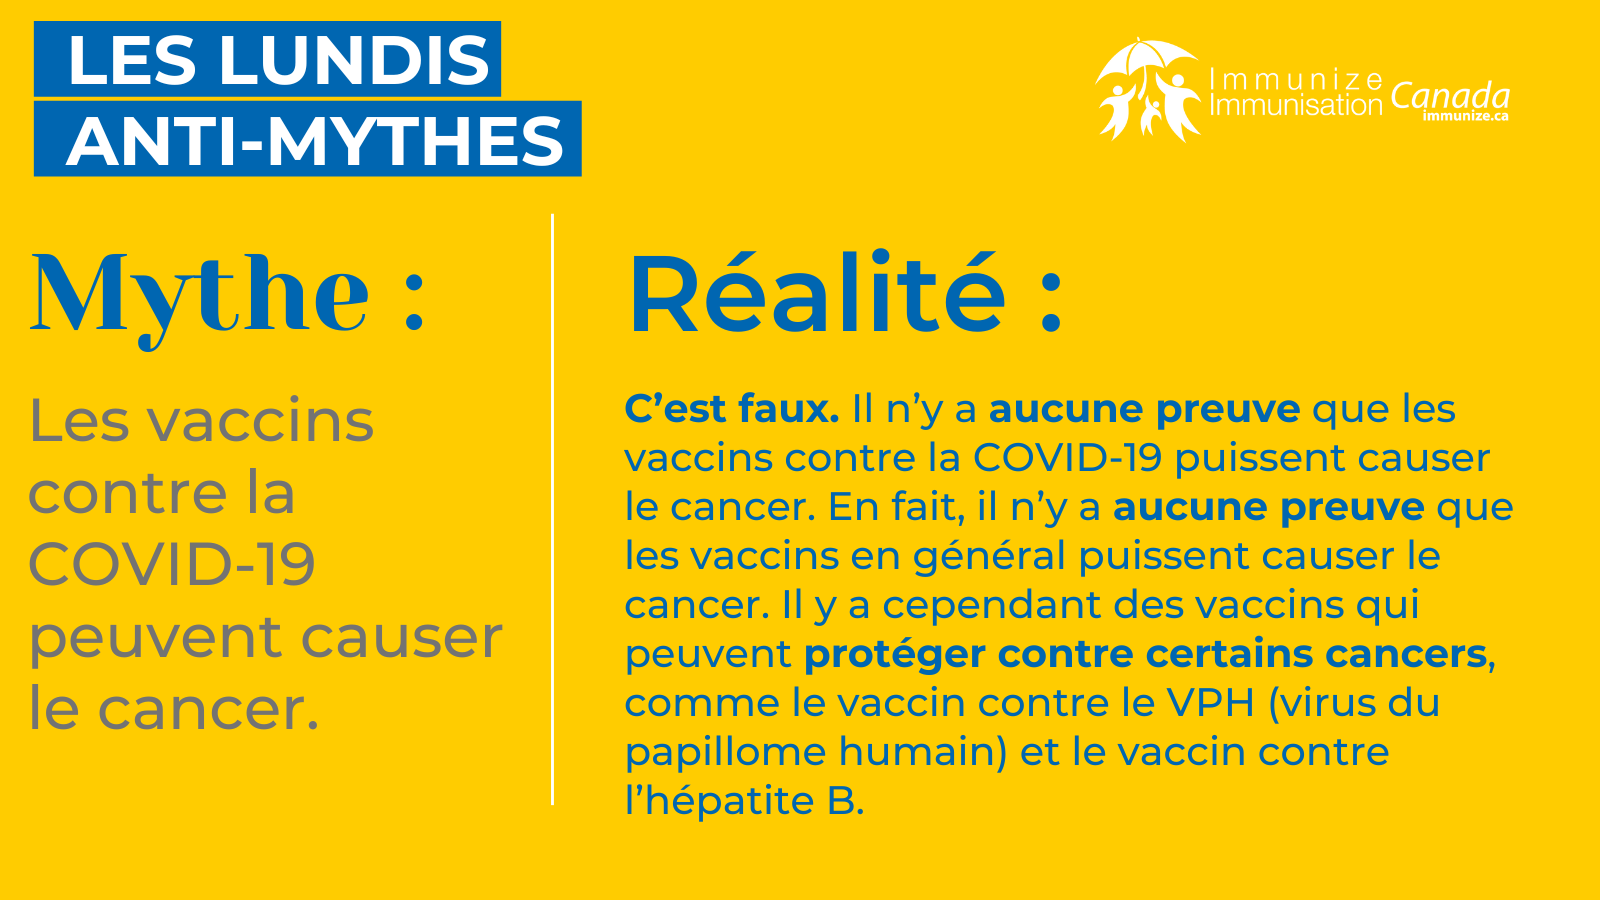 Les lundis anti-mythes - COVID-19 - image 7 pour Twitter/X